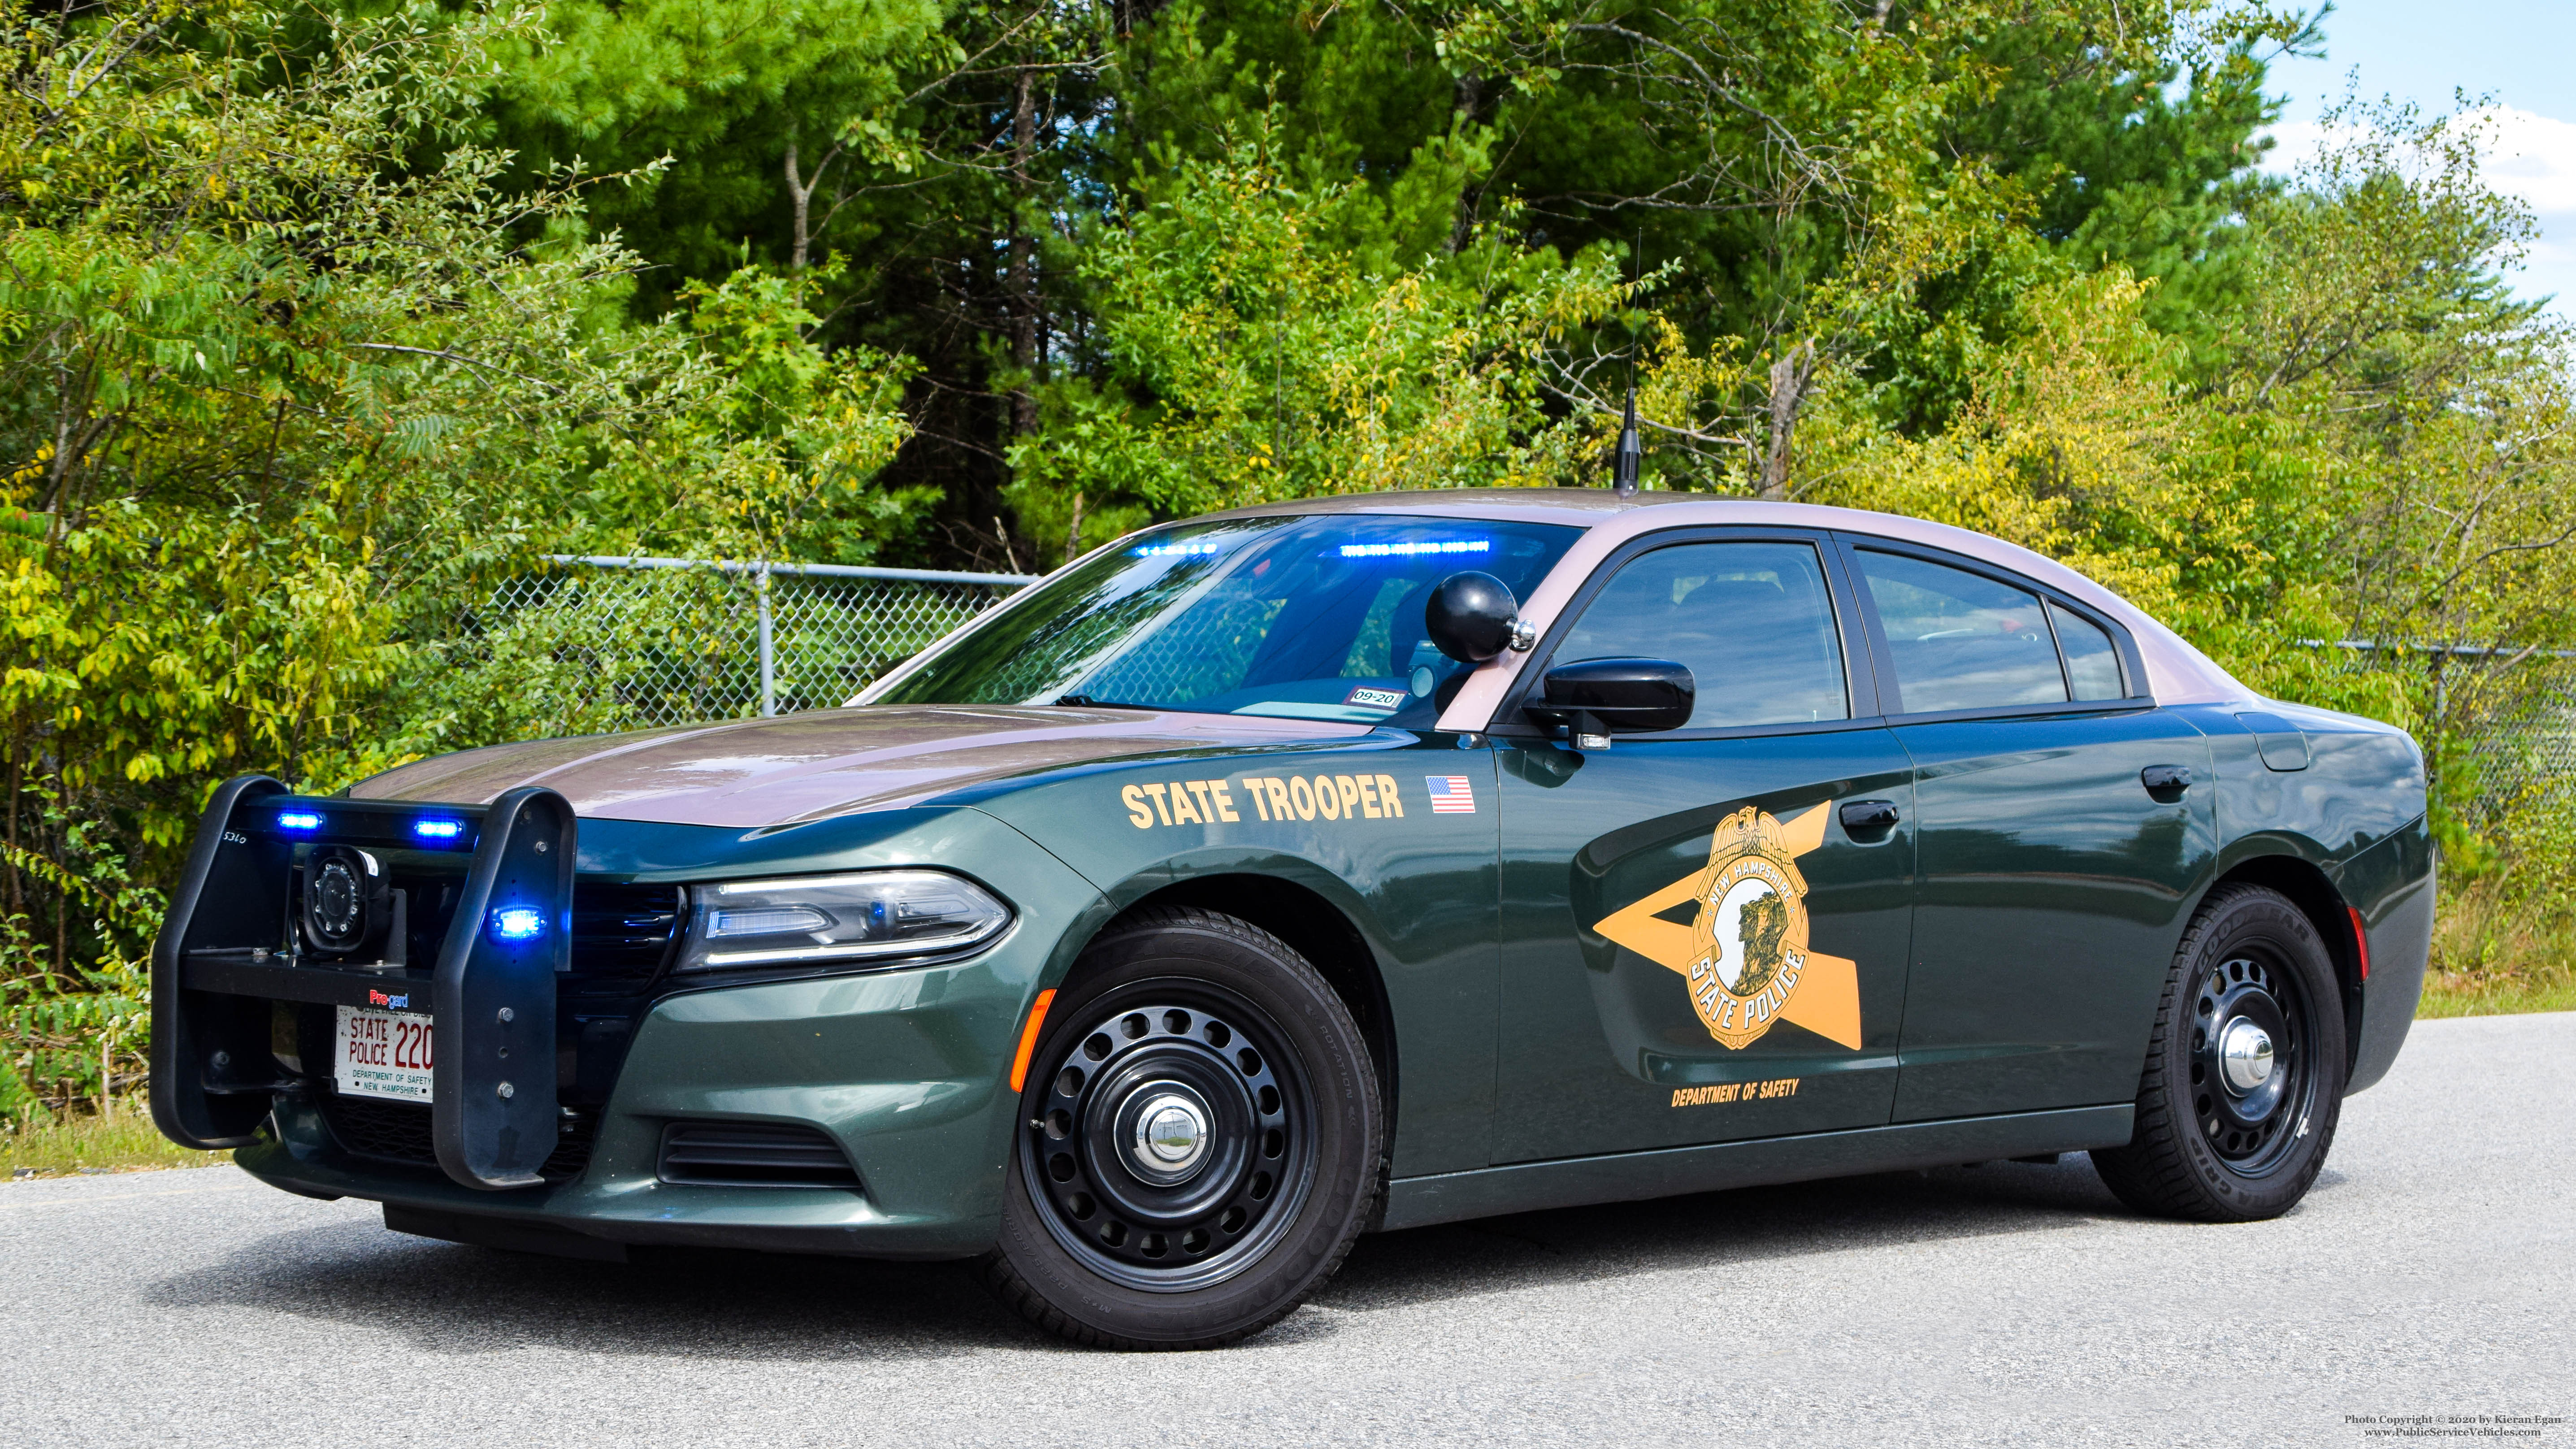 A photo  of New Hampshire State Police
            Cruiser 220, a 2019 Dodge Charger             taken by Kieran Egan